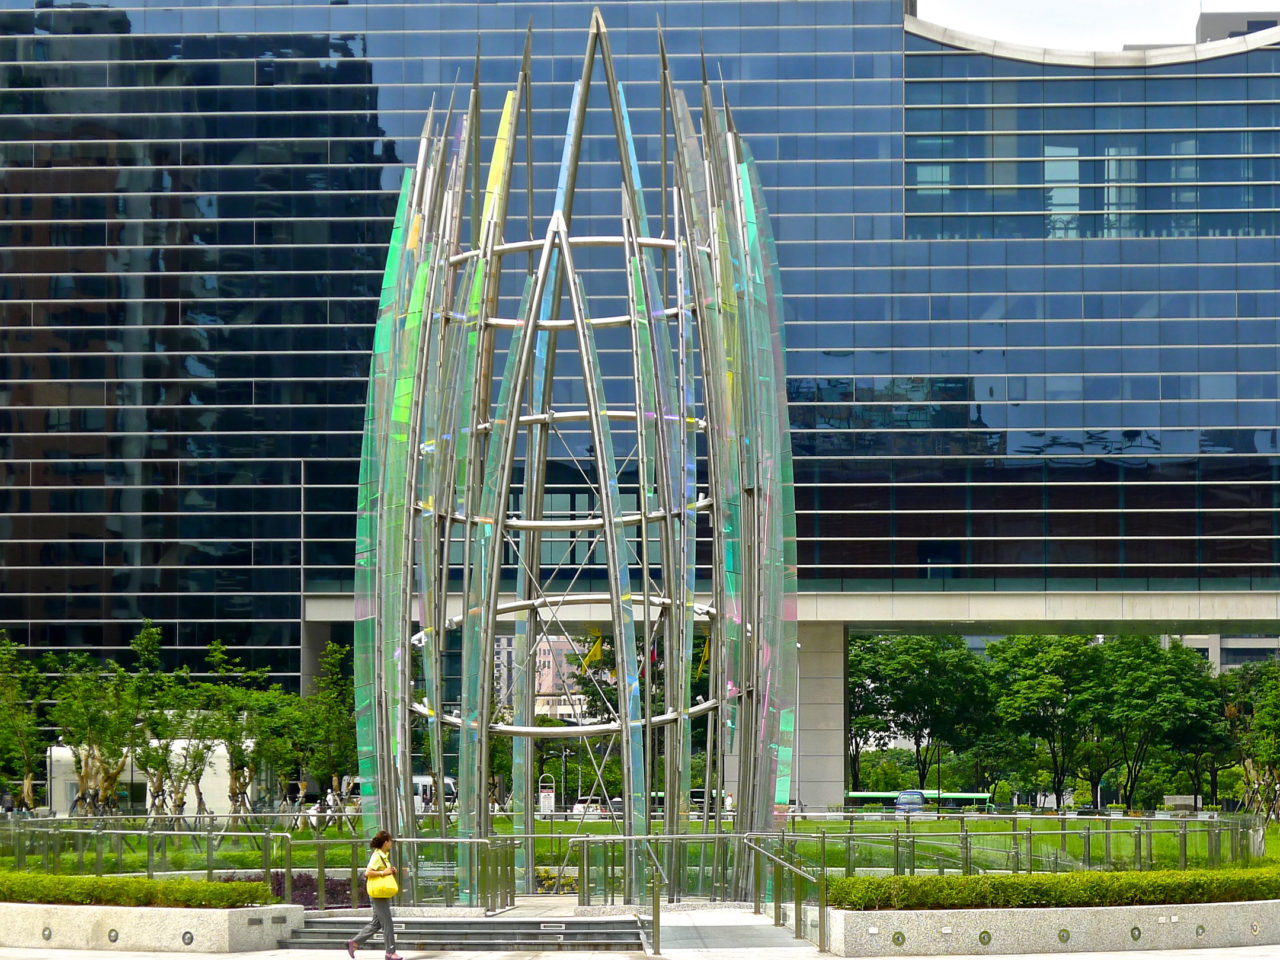 Taichung, Taiwan Civic Center monumental sculpture: Stainless Steel and Laminated Dichroic Glass. During the day, light plays off polished surfaces of stainless steel and laminated glass of the sculpture, Crocus. | Image 3 | Ed Carpenter, Artist